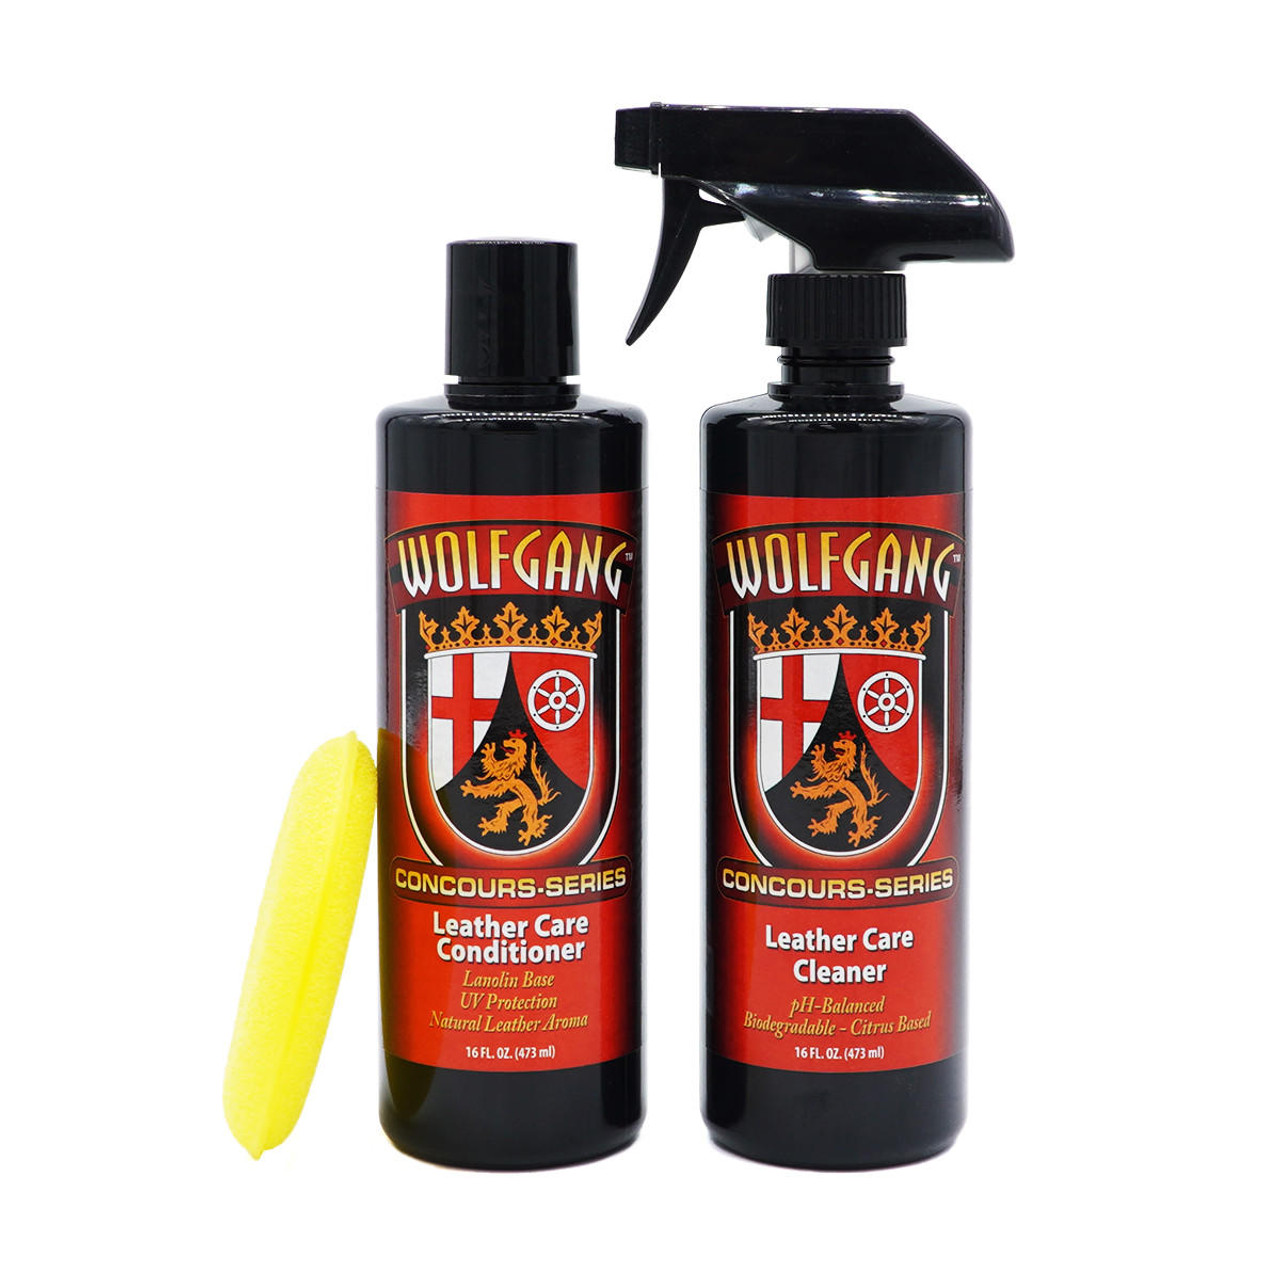 Wolfgang Leather Care Combo, Wolfgang Wolfgang Cleaner, Leather Leather Conditioner